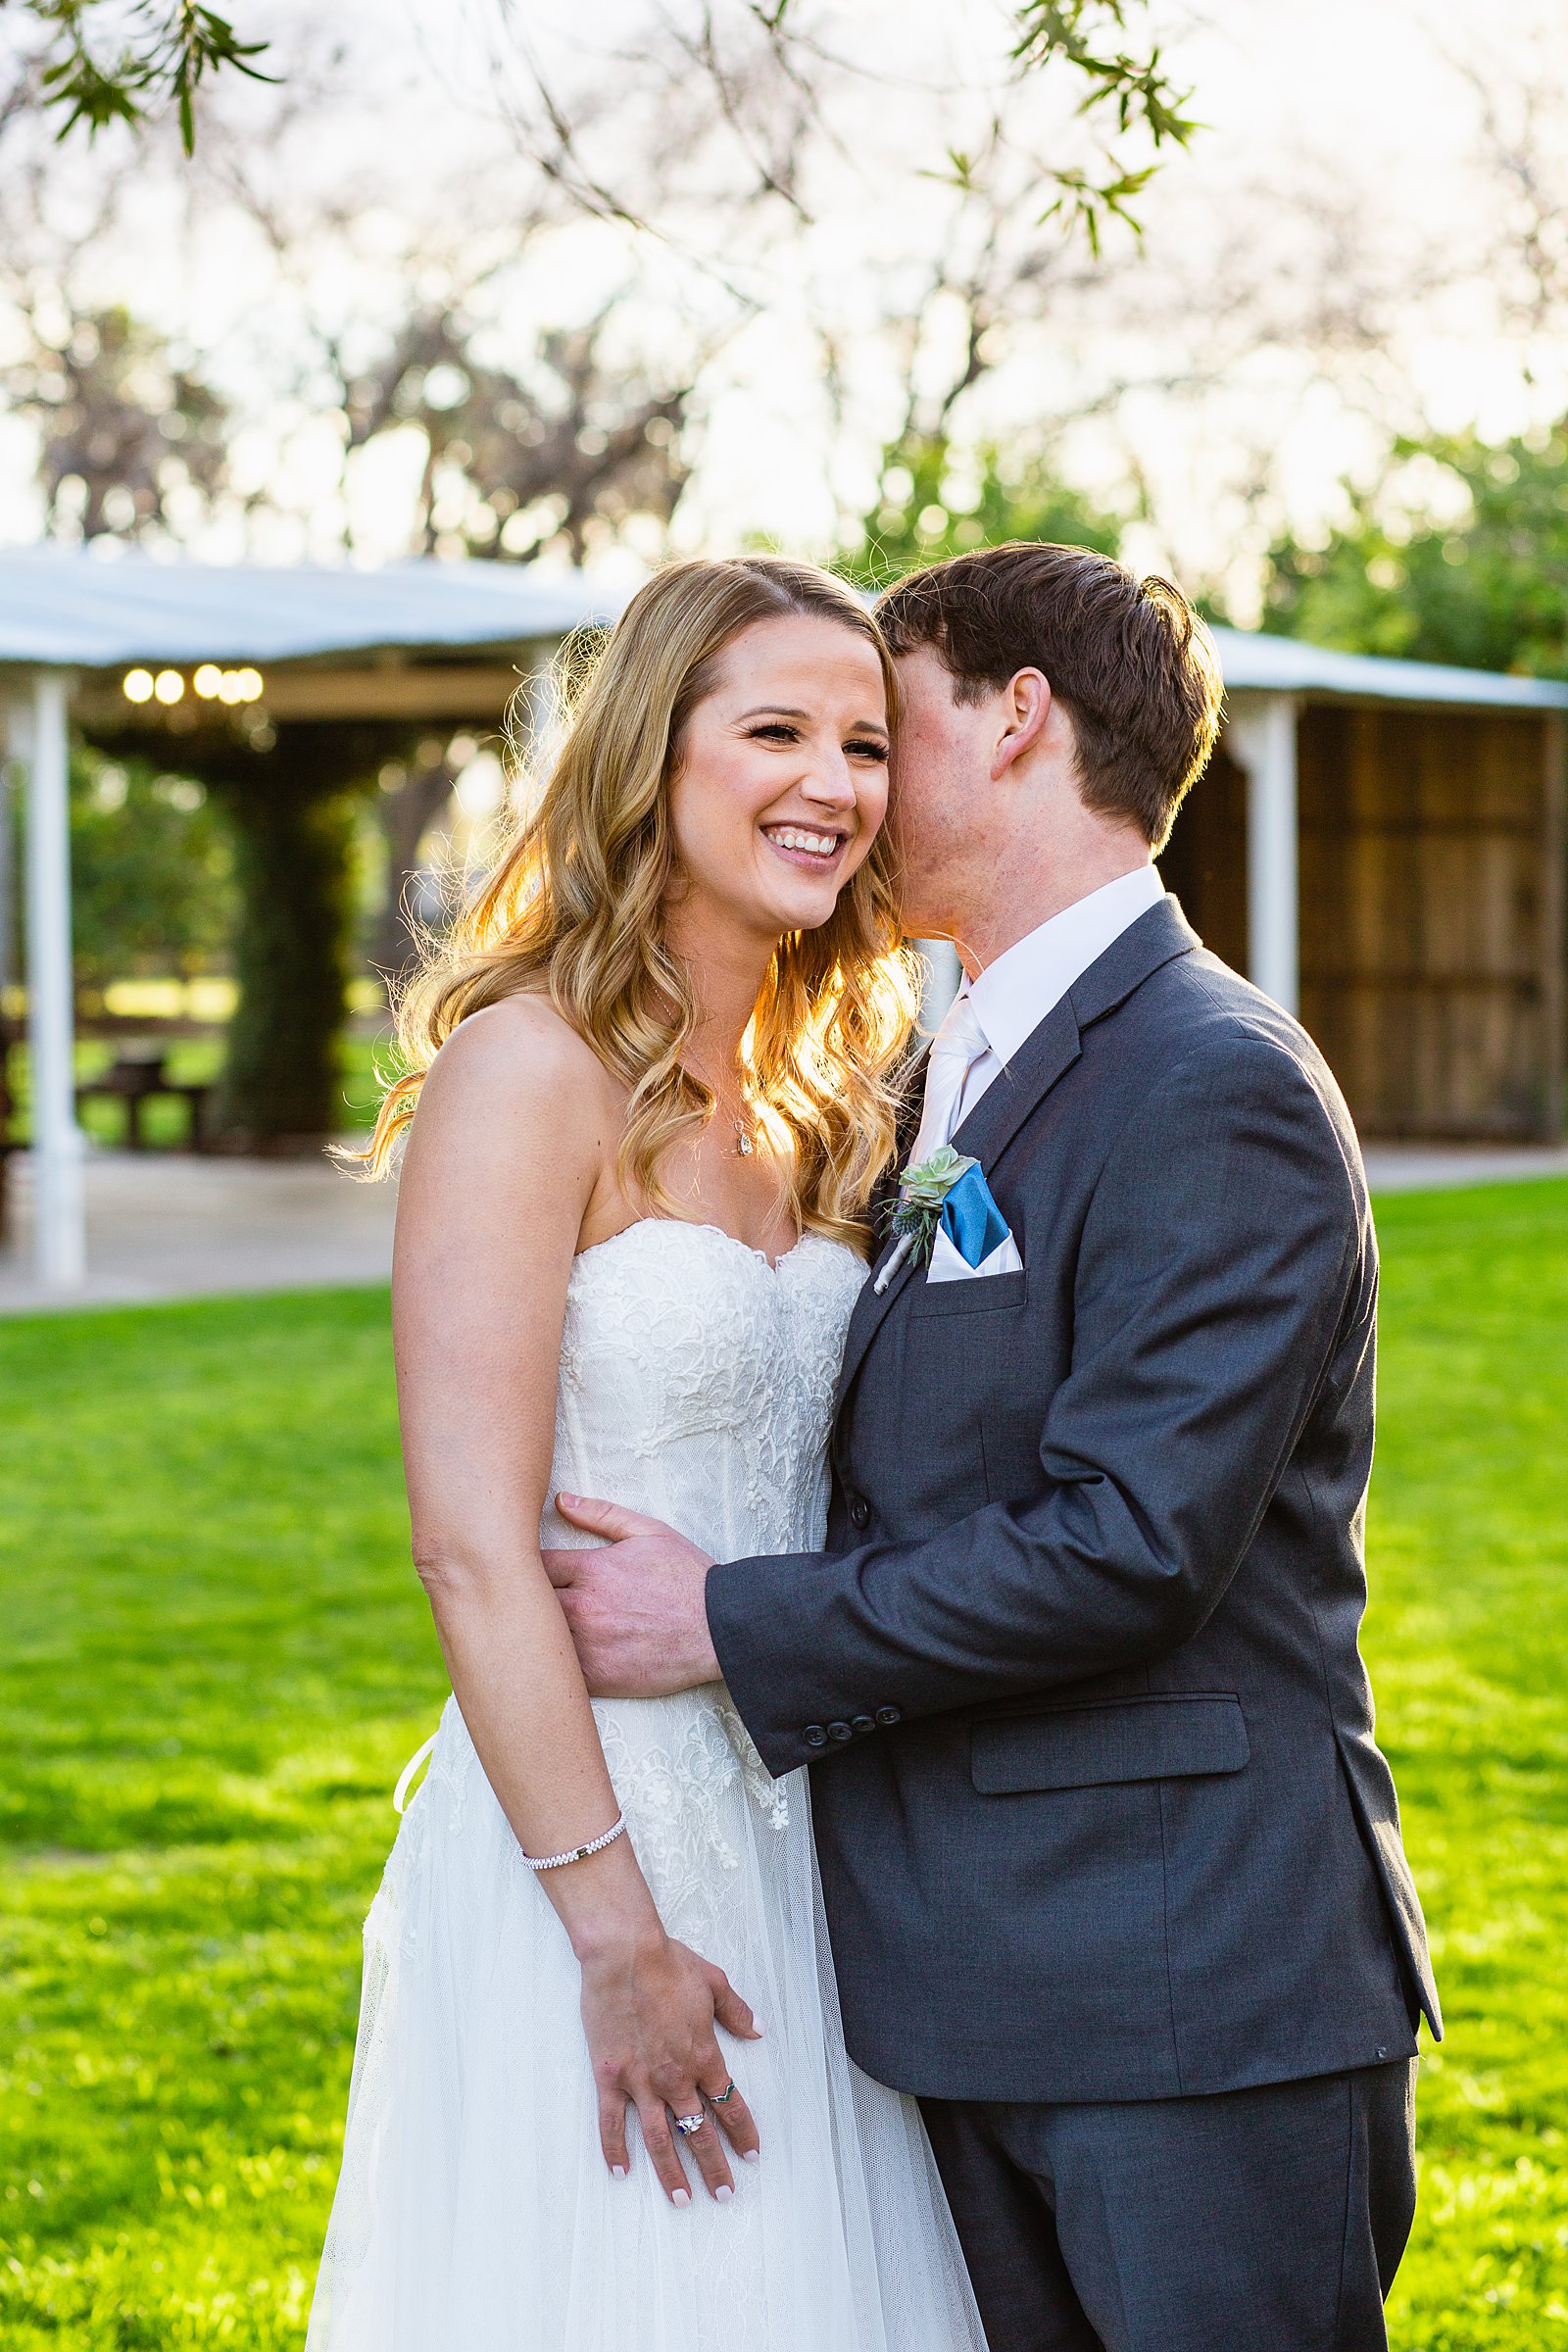 Bride and Groom laughing together during their Venue At The Grove wedding by Arizona wedding photographer PMA Photography.